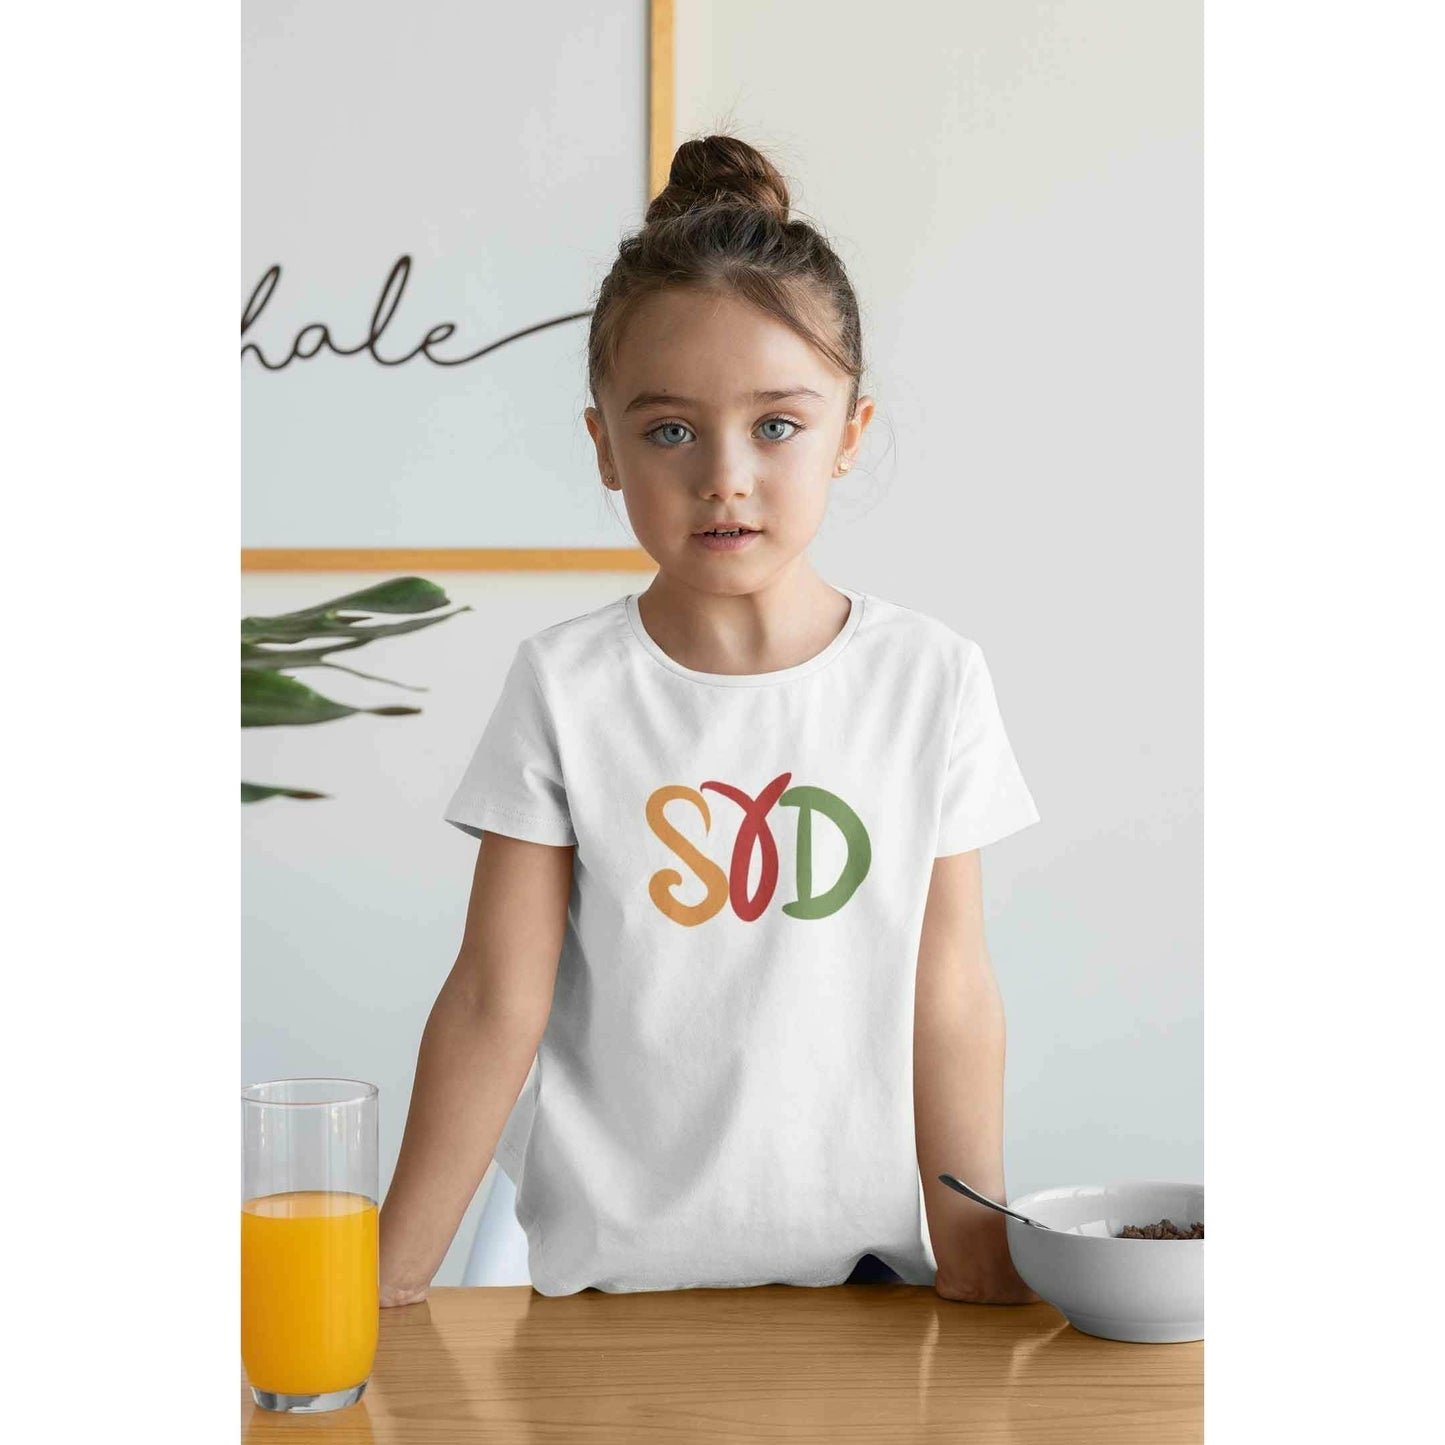 SYD Kids Youth Crew T-Shirt - Sunny Sydney Australia - Famous Outdoor Gear Store